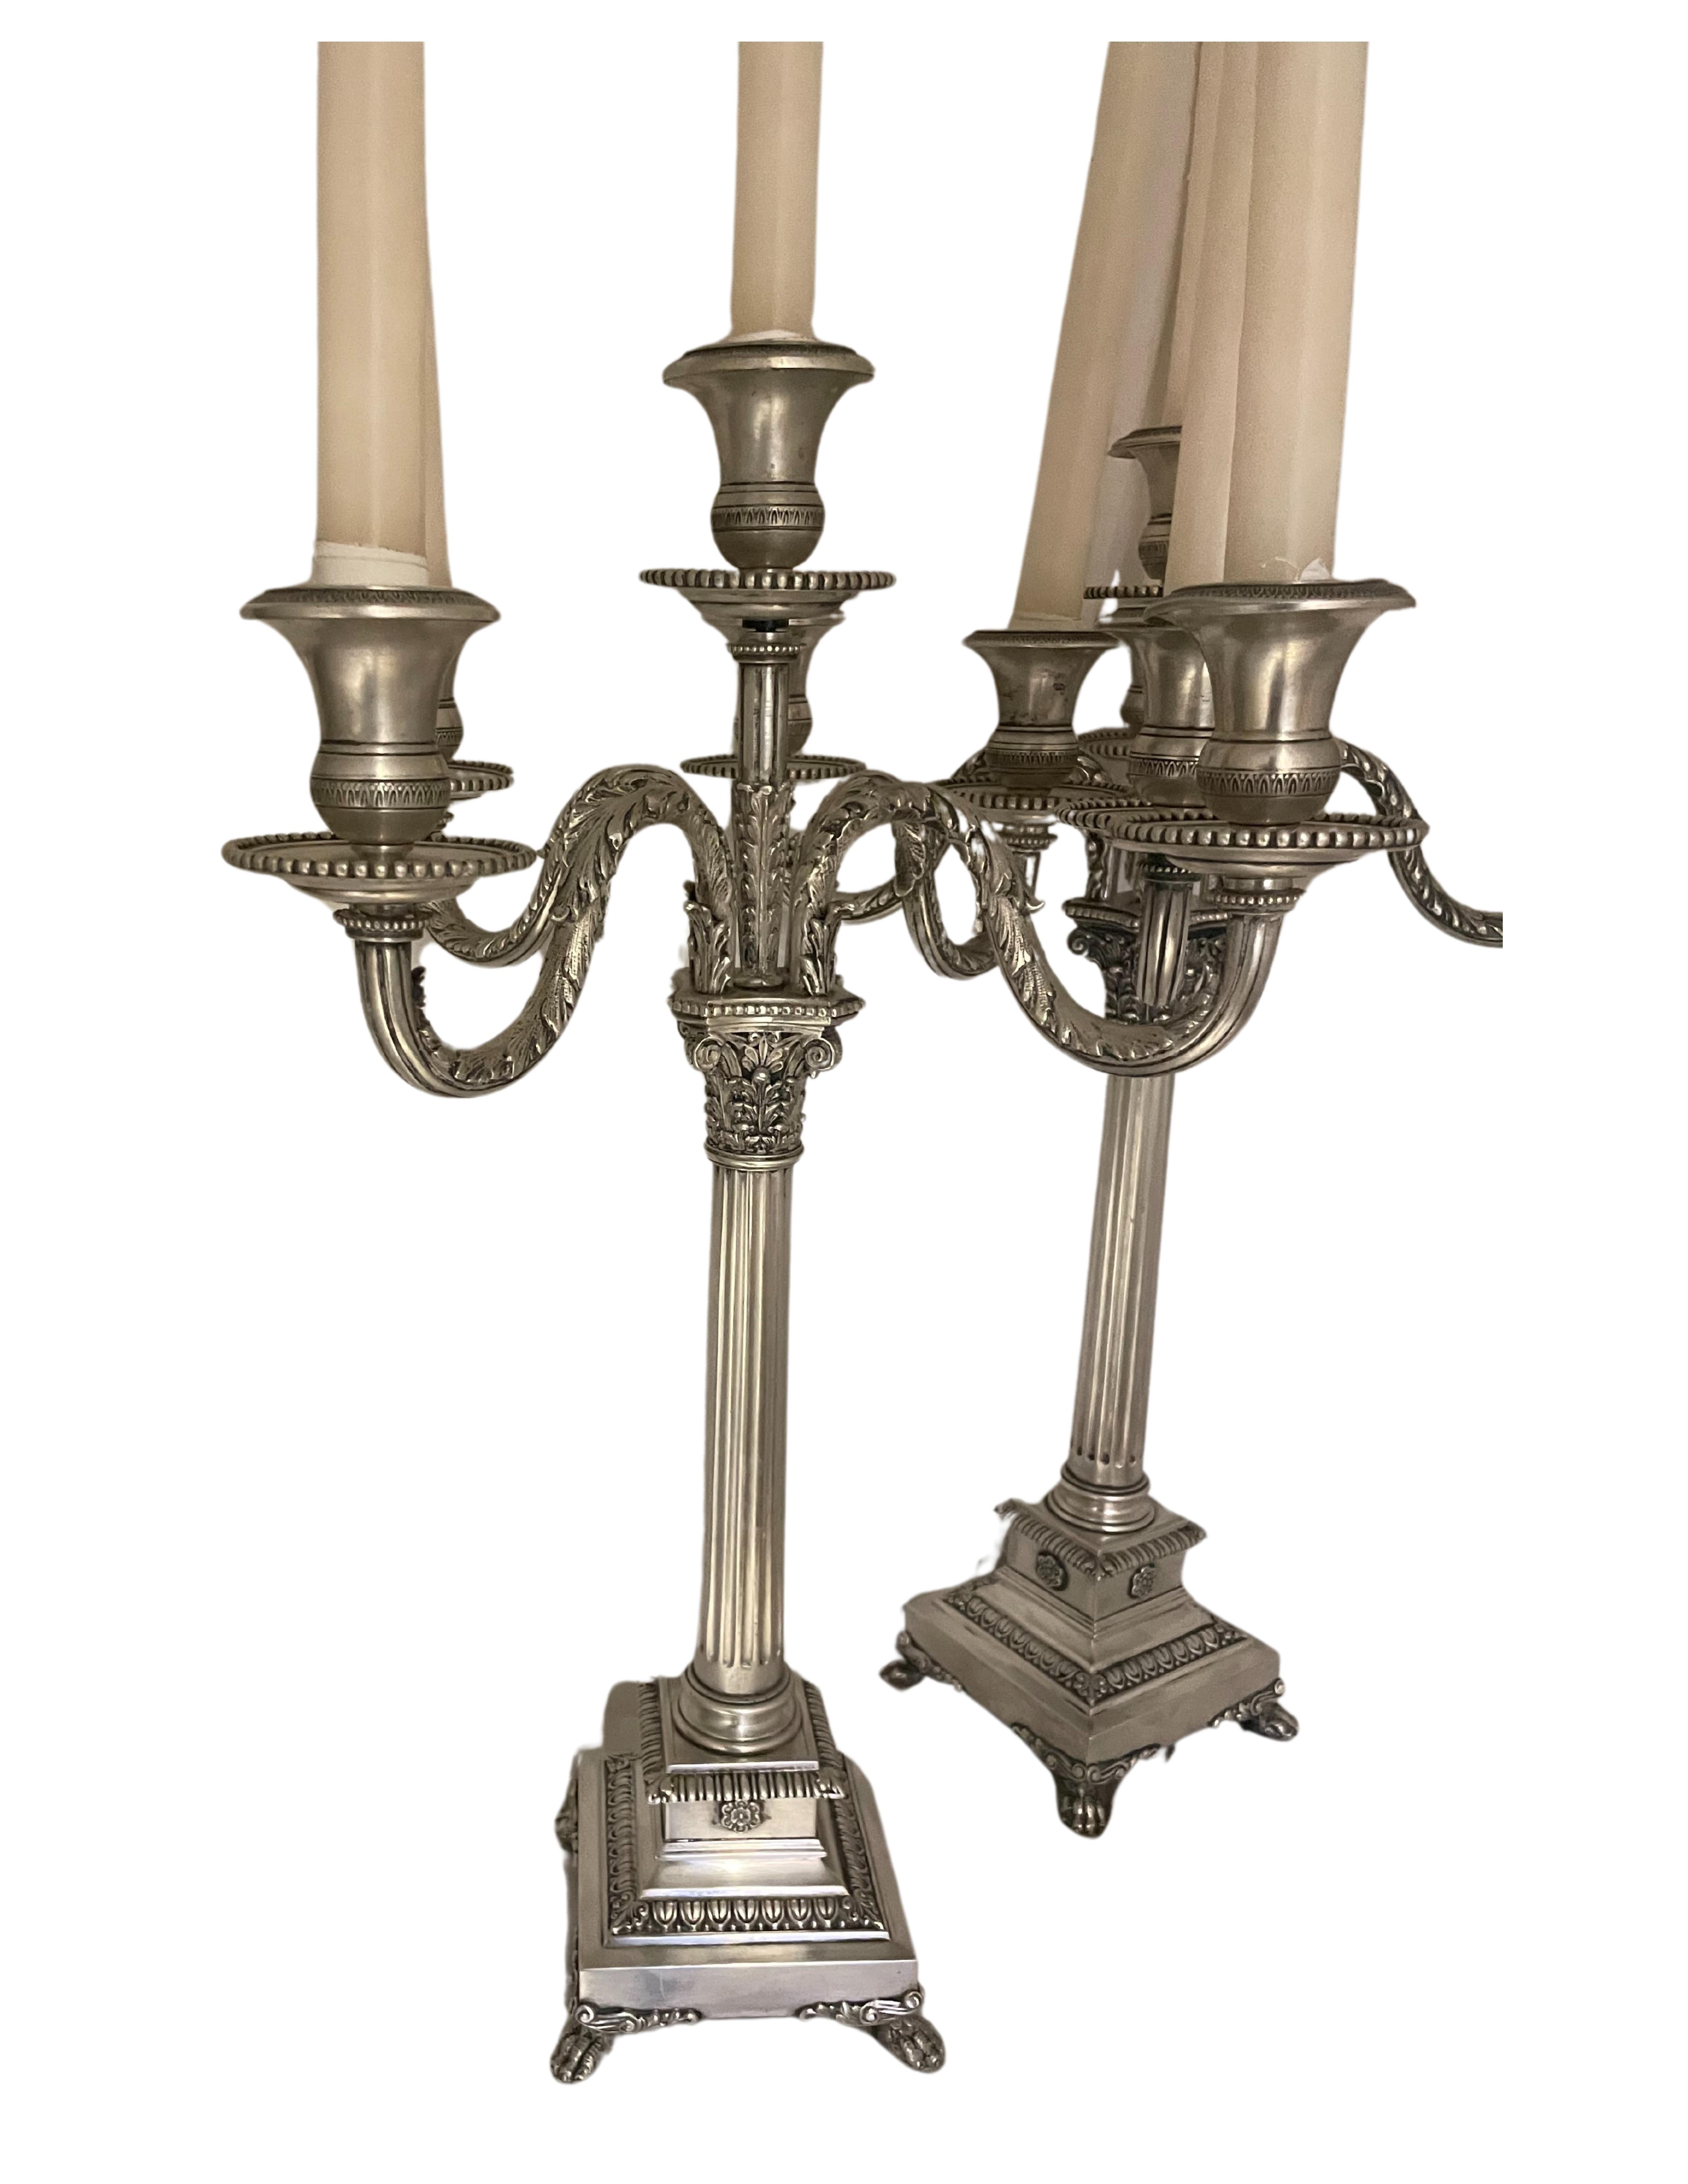 Five Point Silver Candelabras that are 29 oz each with 800 marking and Made in Italy stamp.